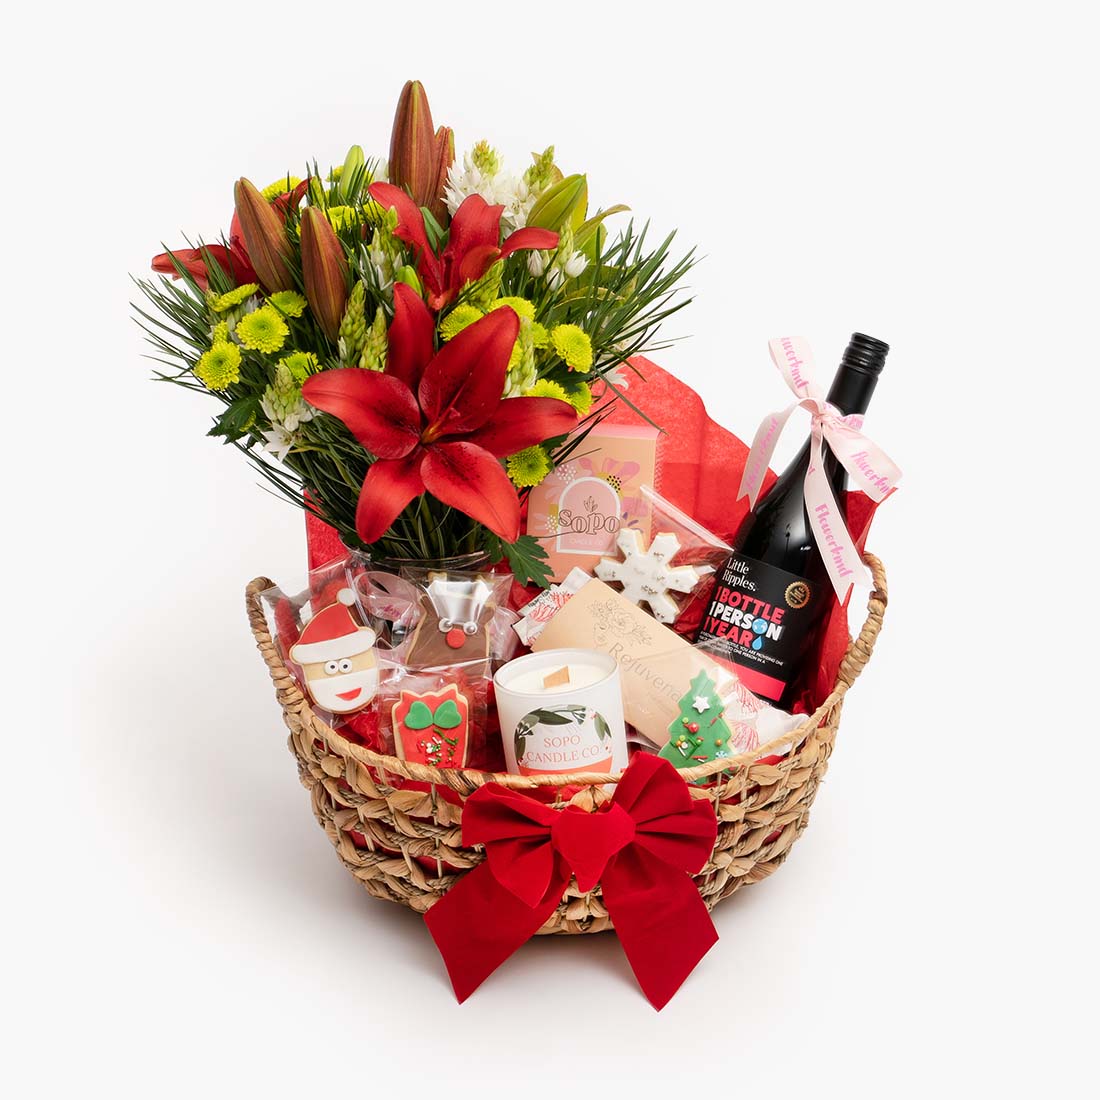 Red Christmas hamper with wine flowers and a candle from a Geelong florist